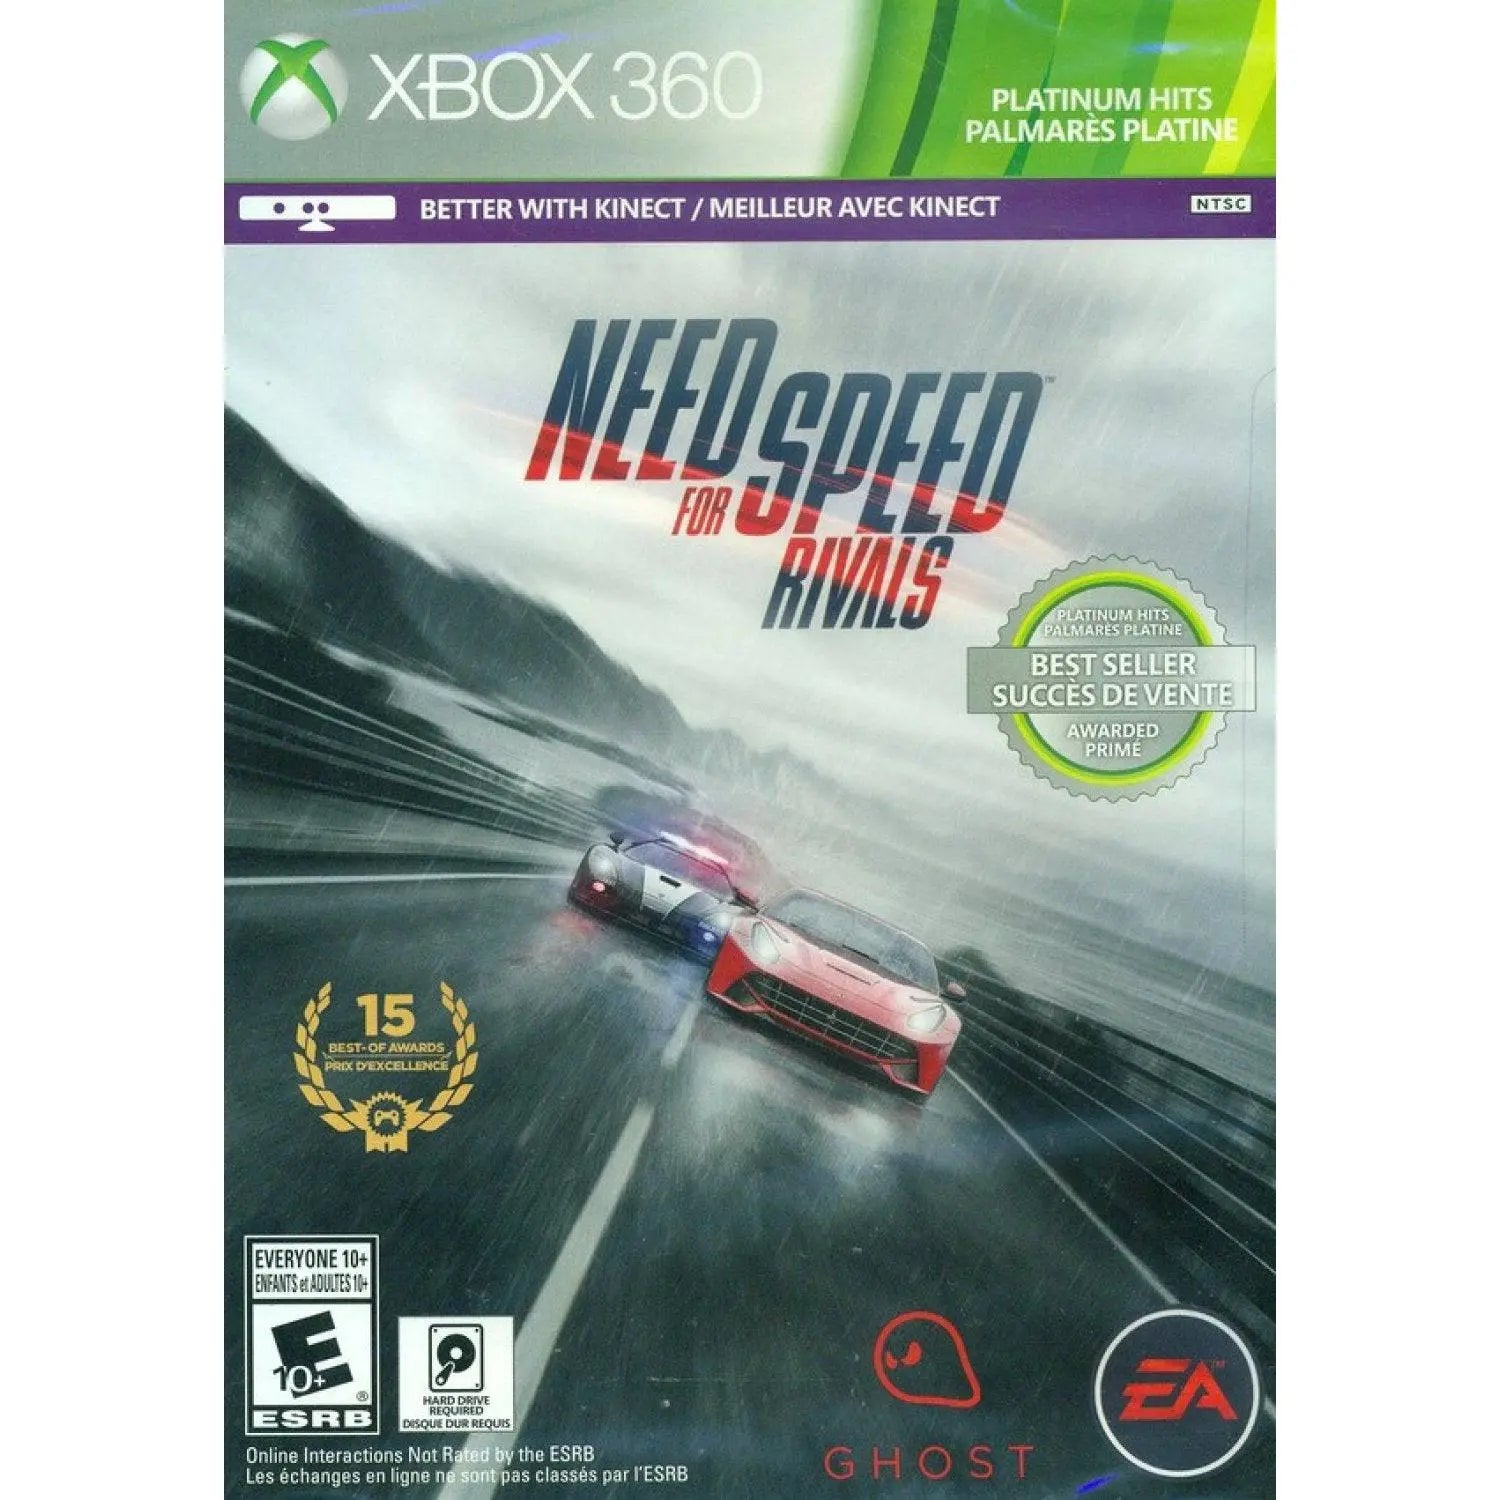 NEED FOR SPEED RIVALS (PLATINUM HITS) - Xbox 360 - Used King Gaming